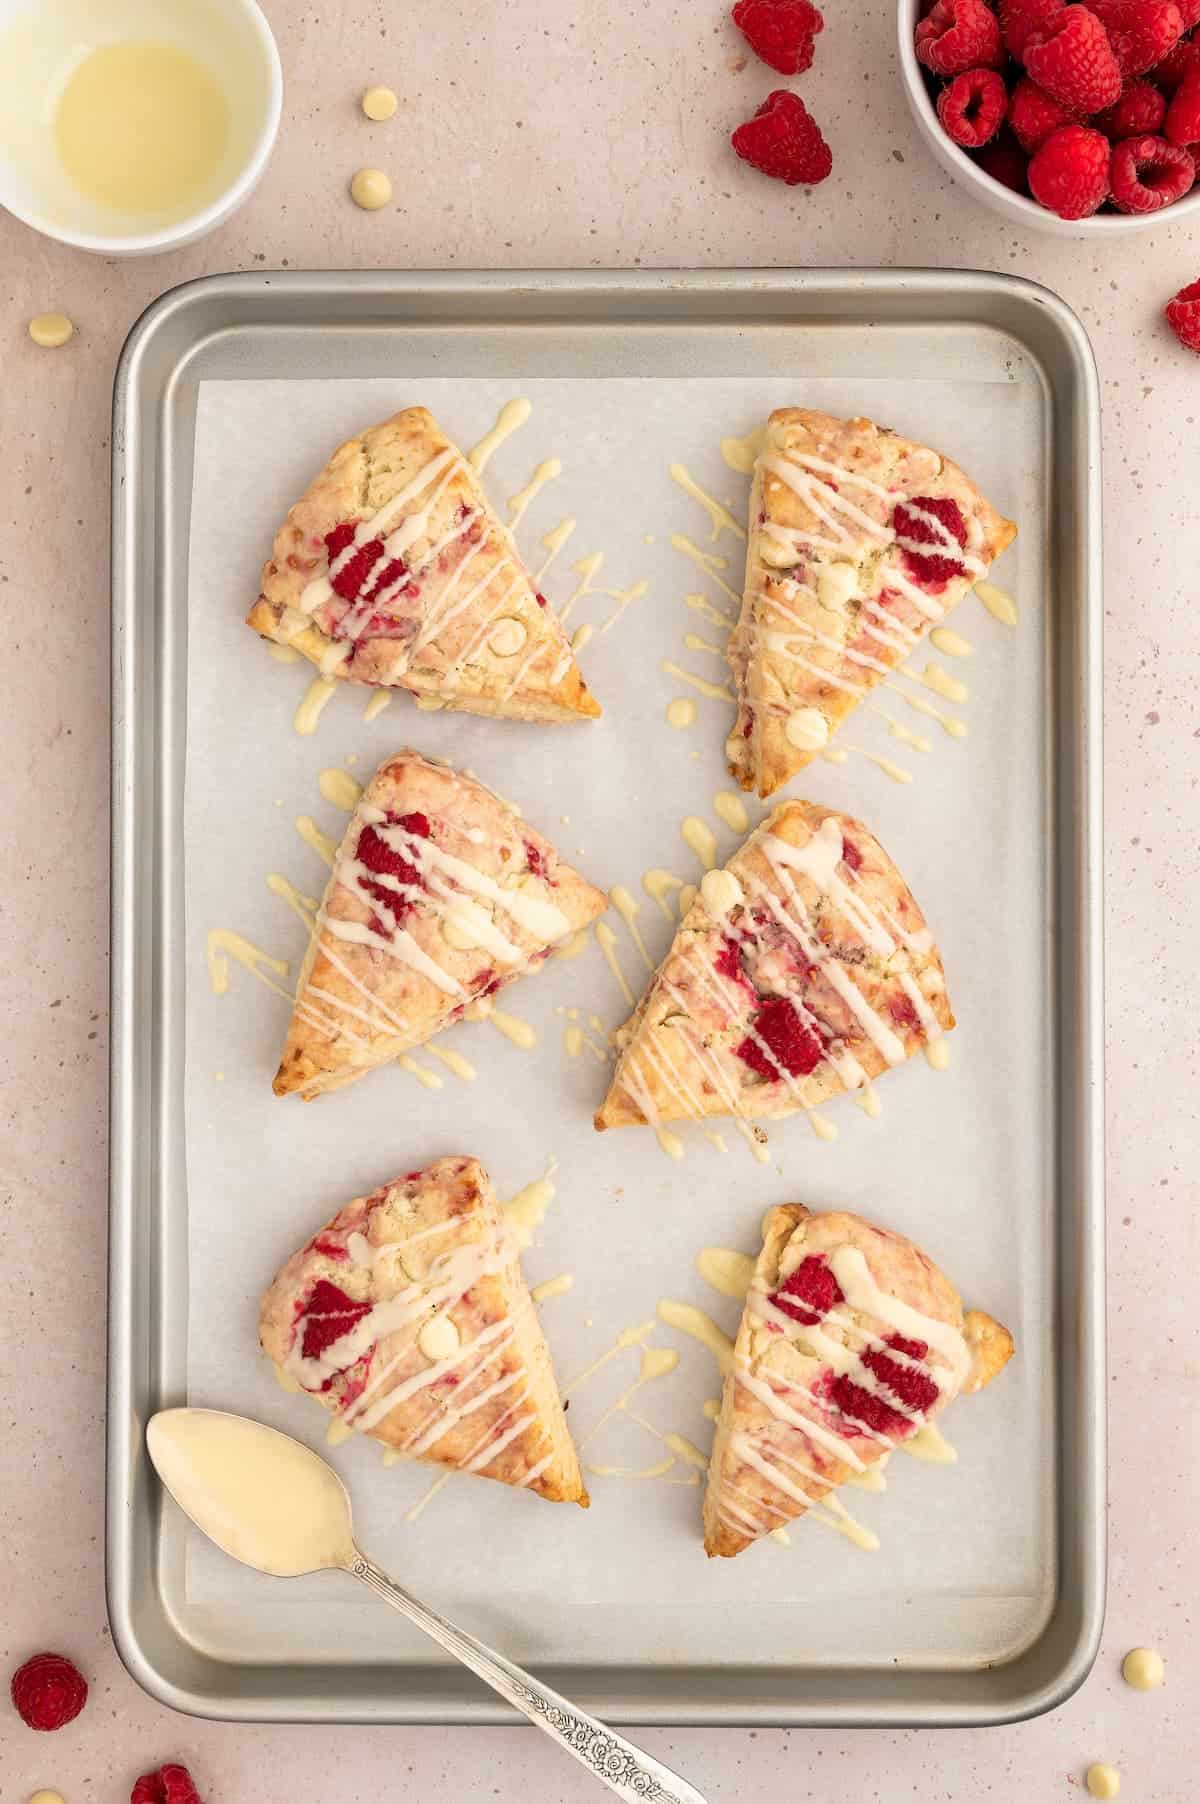 Raspberry vegan scones on a baking sheet drizzled with melted vegan white chocolate.